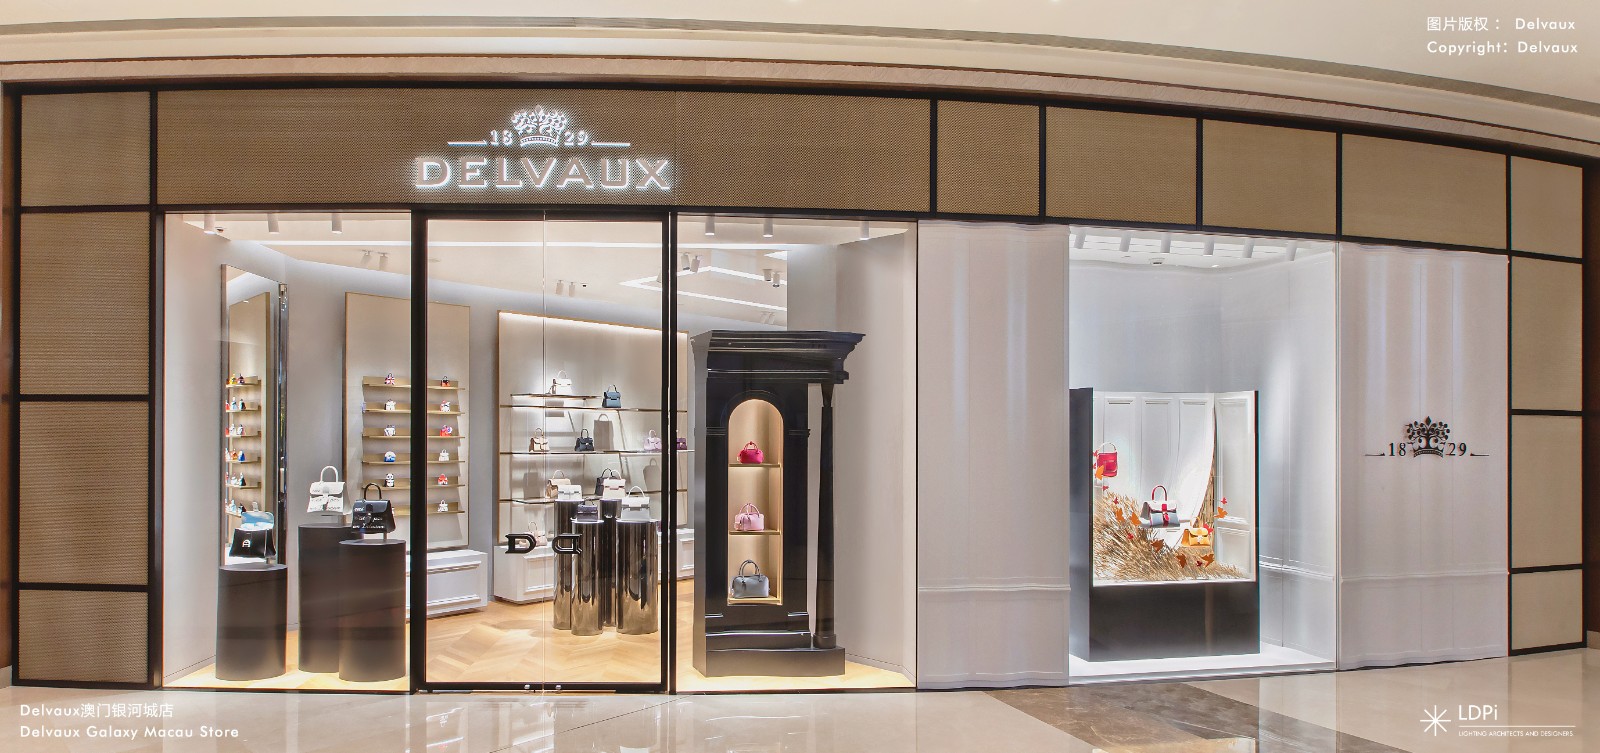 Delvaux opens new London store